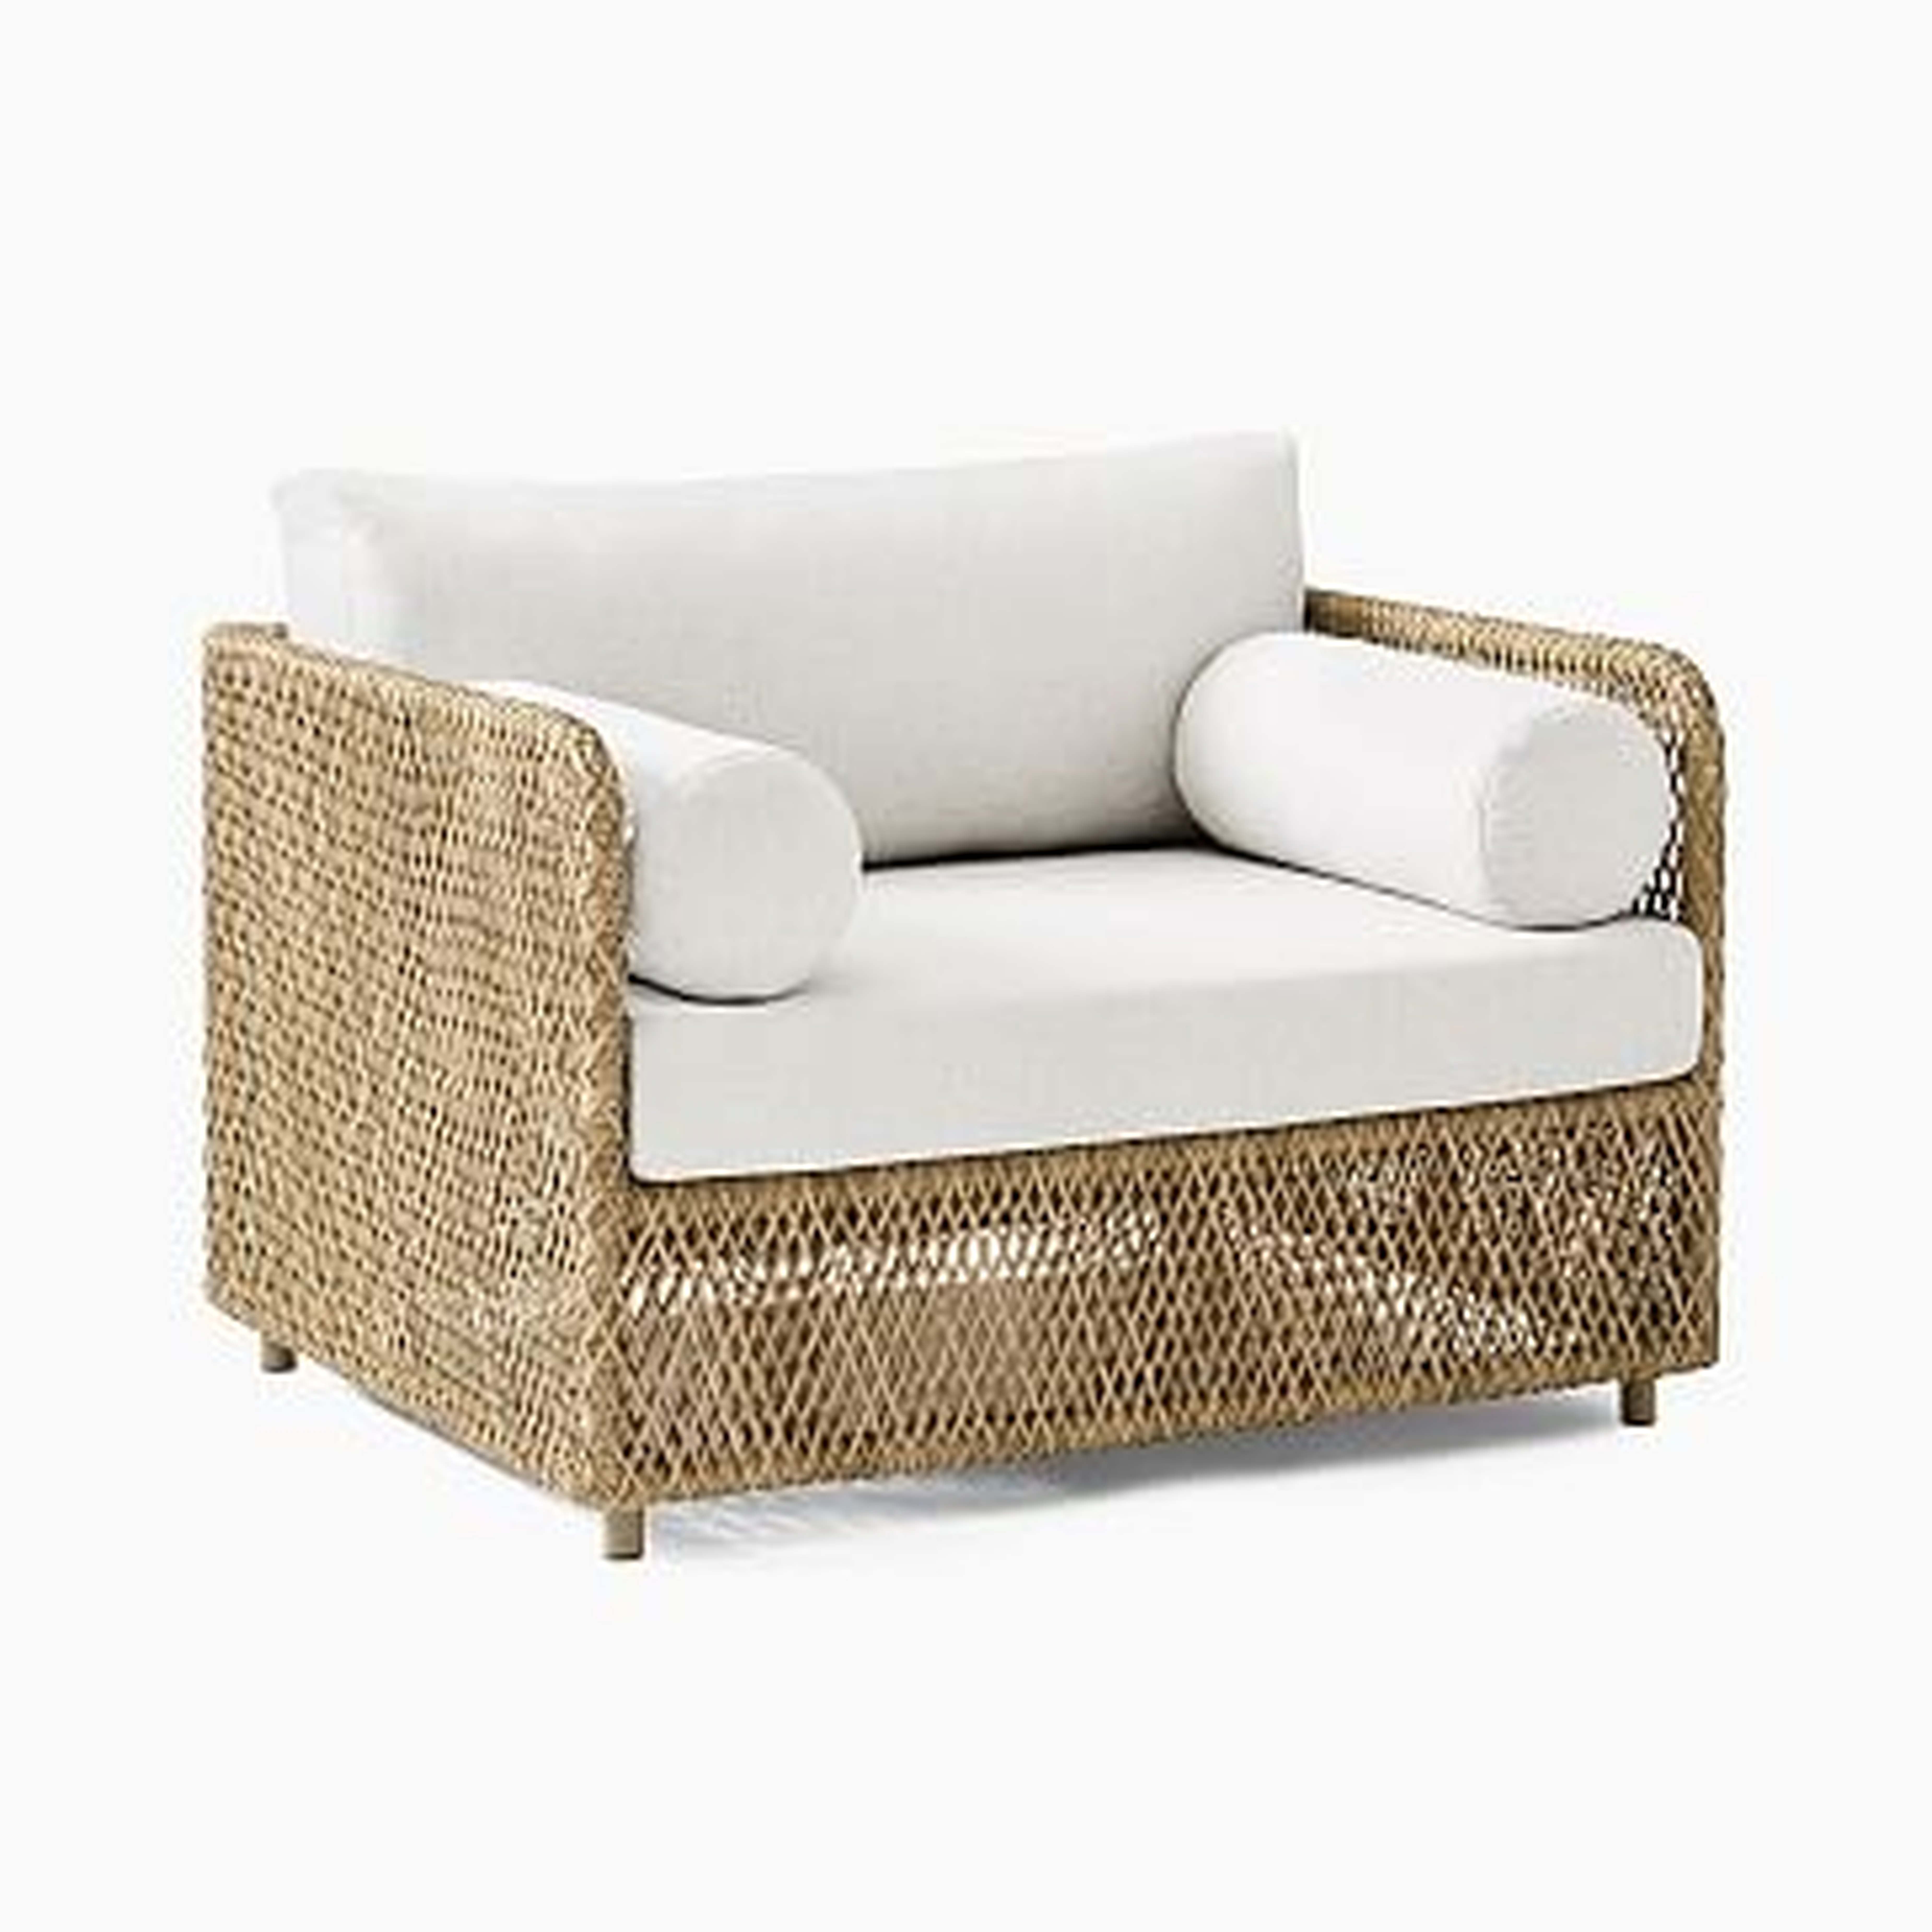 Coastal Lounge Chair, All Weather Wicker, Natural - West Elm